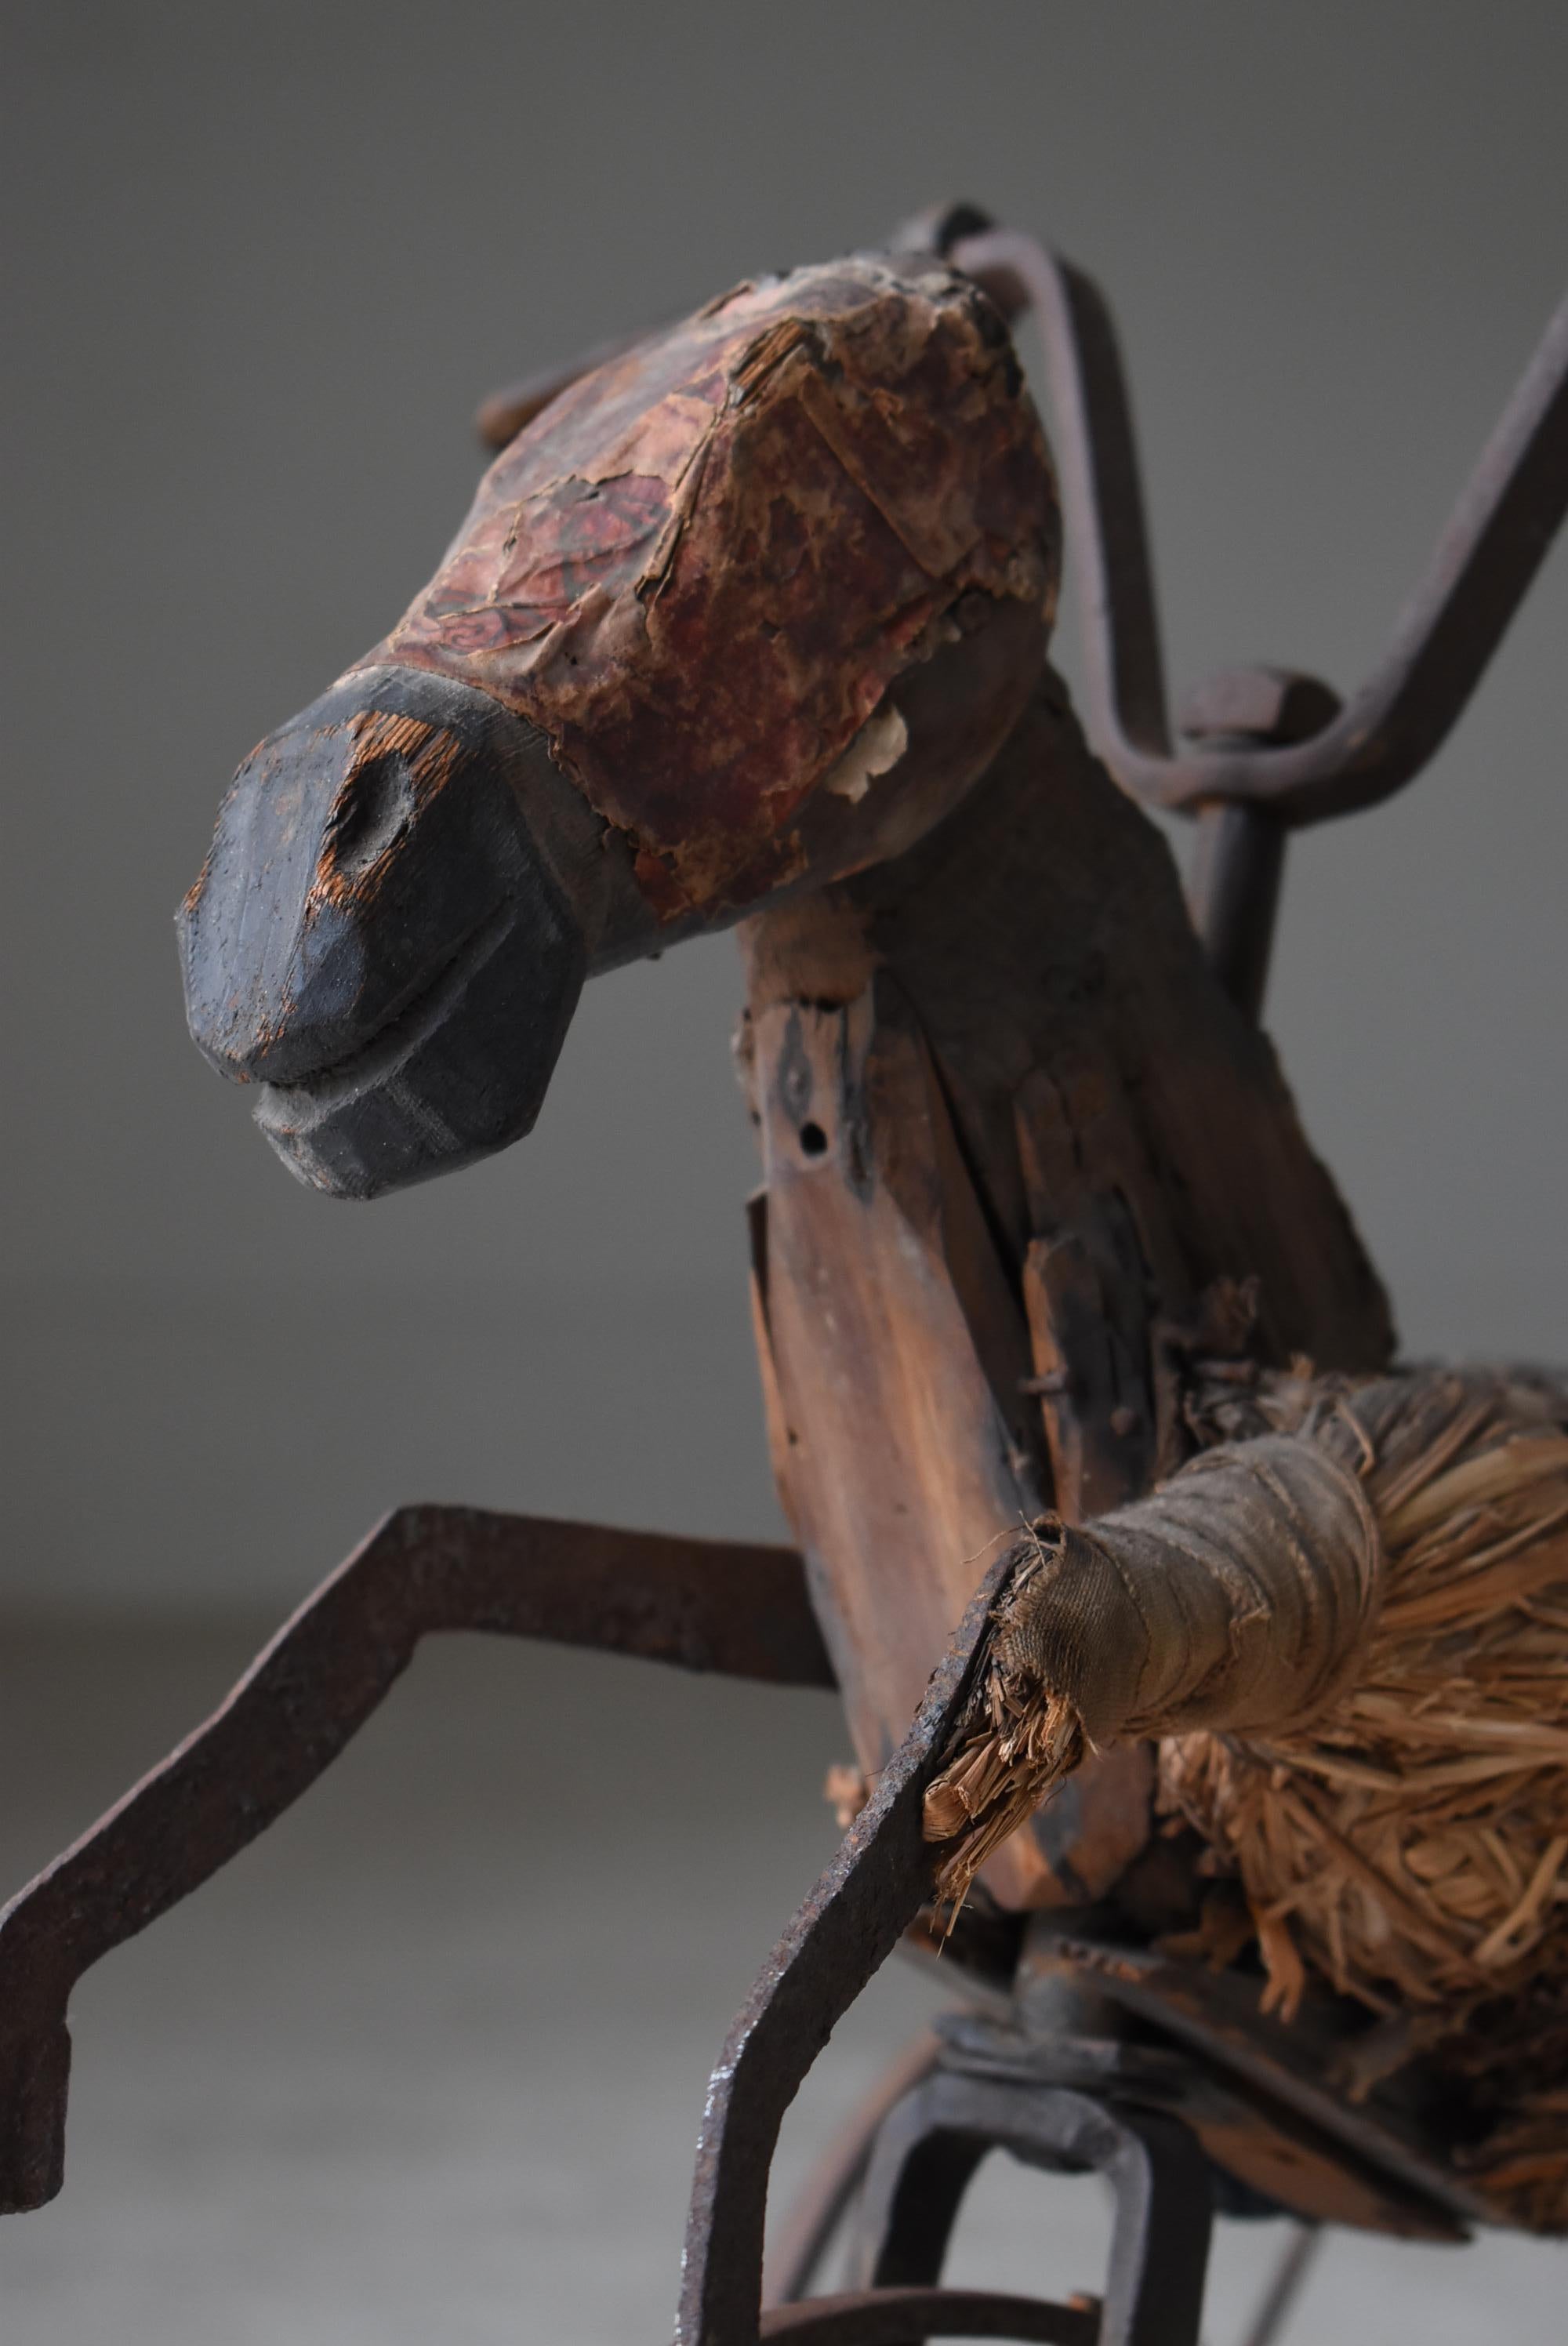 Japanese Antique Wooden Horse Tricycle 1860s-1900s / Sculpture Wabisabi  In Good Condition For Sale In Sammu-shi, Chiba